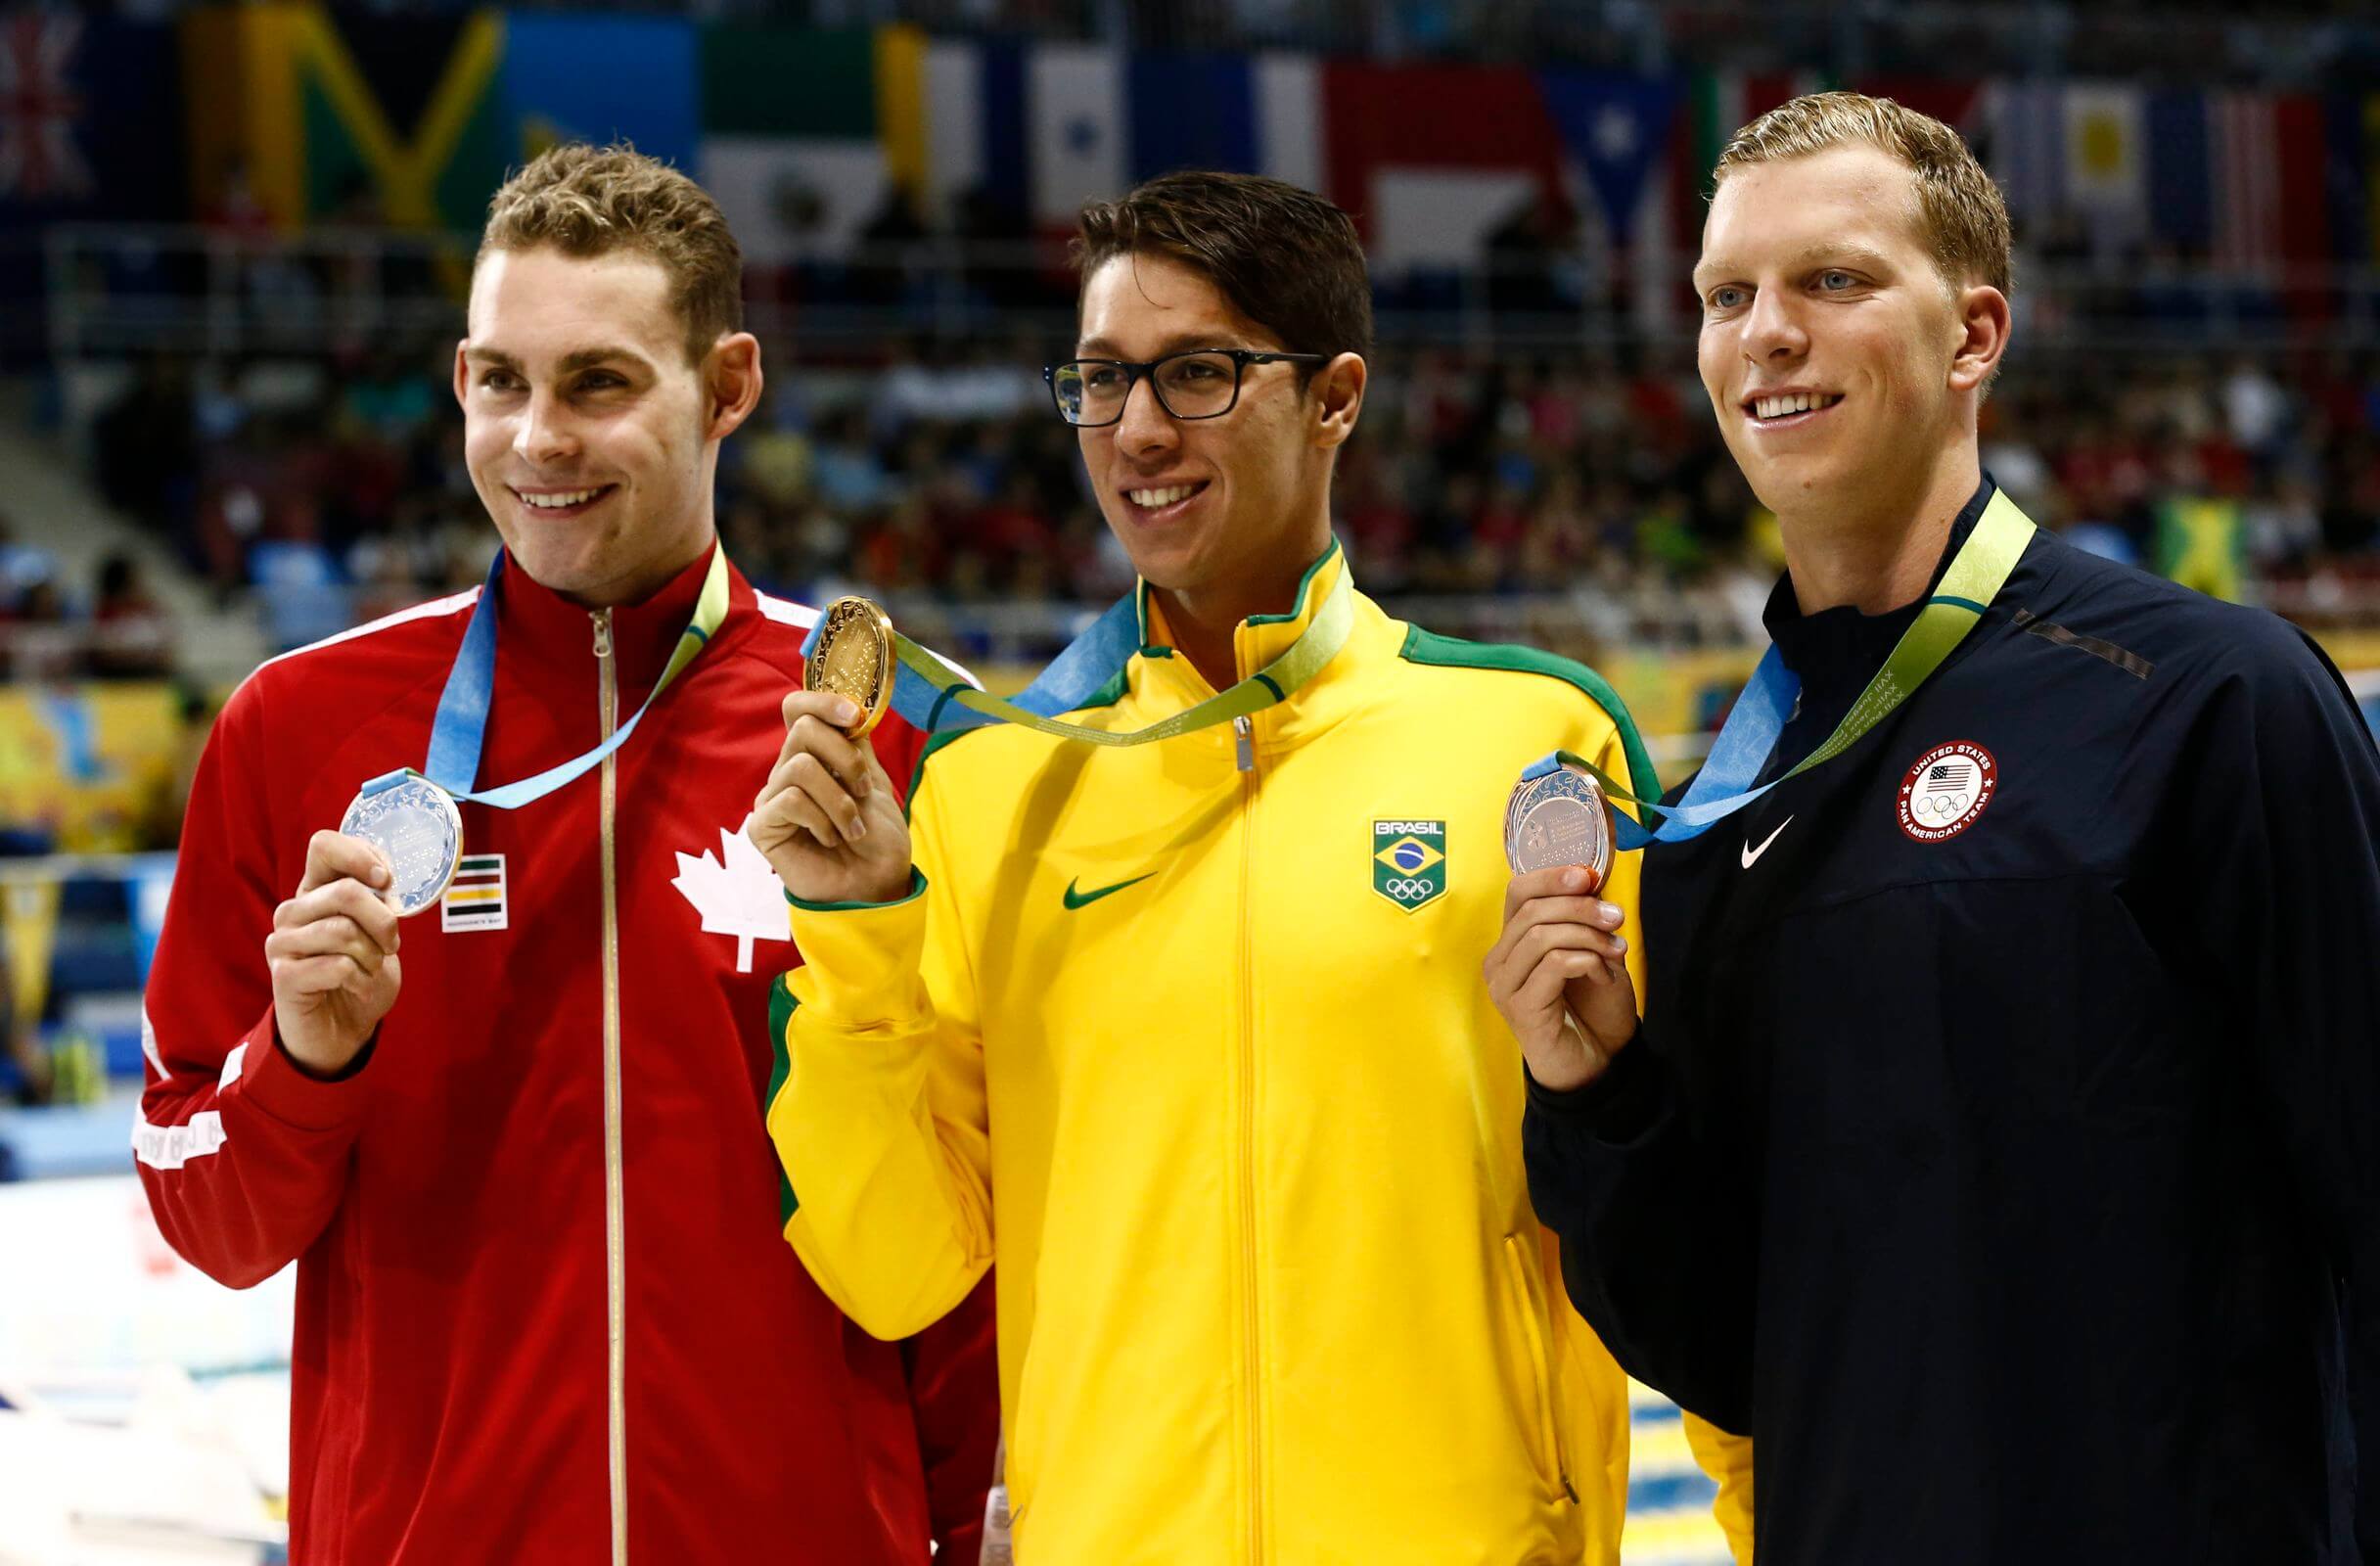 Jul 17, 2015; Toronto, Ontario, CAN; Luke Reilly of Canada (left) , Brandonn Almeida of Brazil (middle) and Max Williamson of the United States (right) pose with their medals after the men's swimming 400m individual medley final the 2015 Pan Am Games at Pan Am Aquatics UTS Centre and Field House. Mandatory Credit: Rob Schumacher-USA TODAY Sports